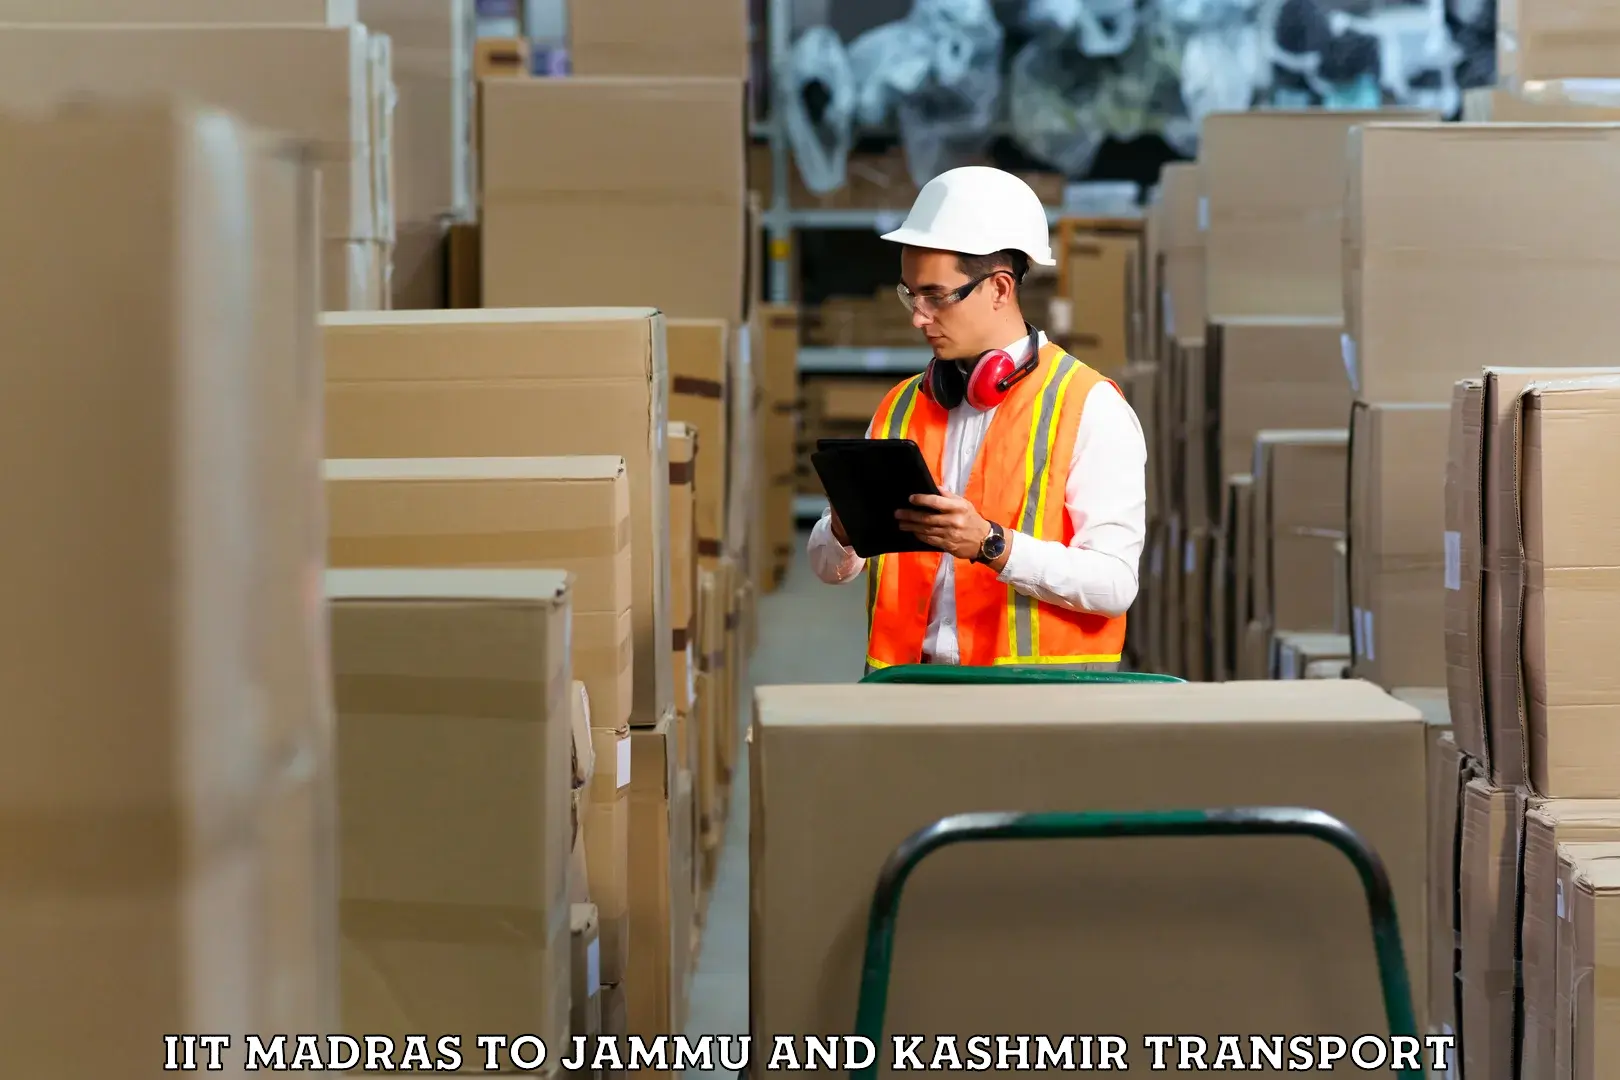 Commercial transport service IIT Madras to Jammu and Kashmir